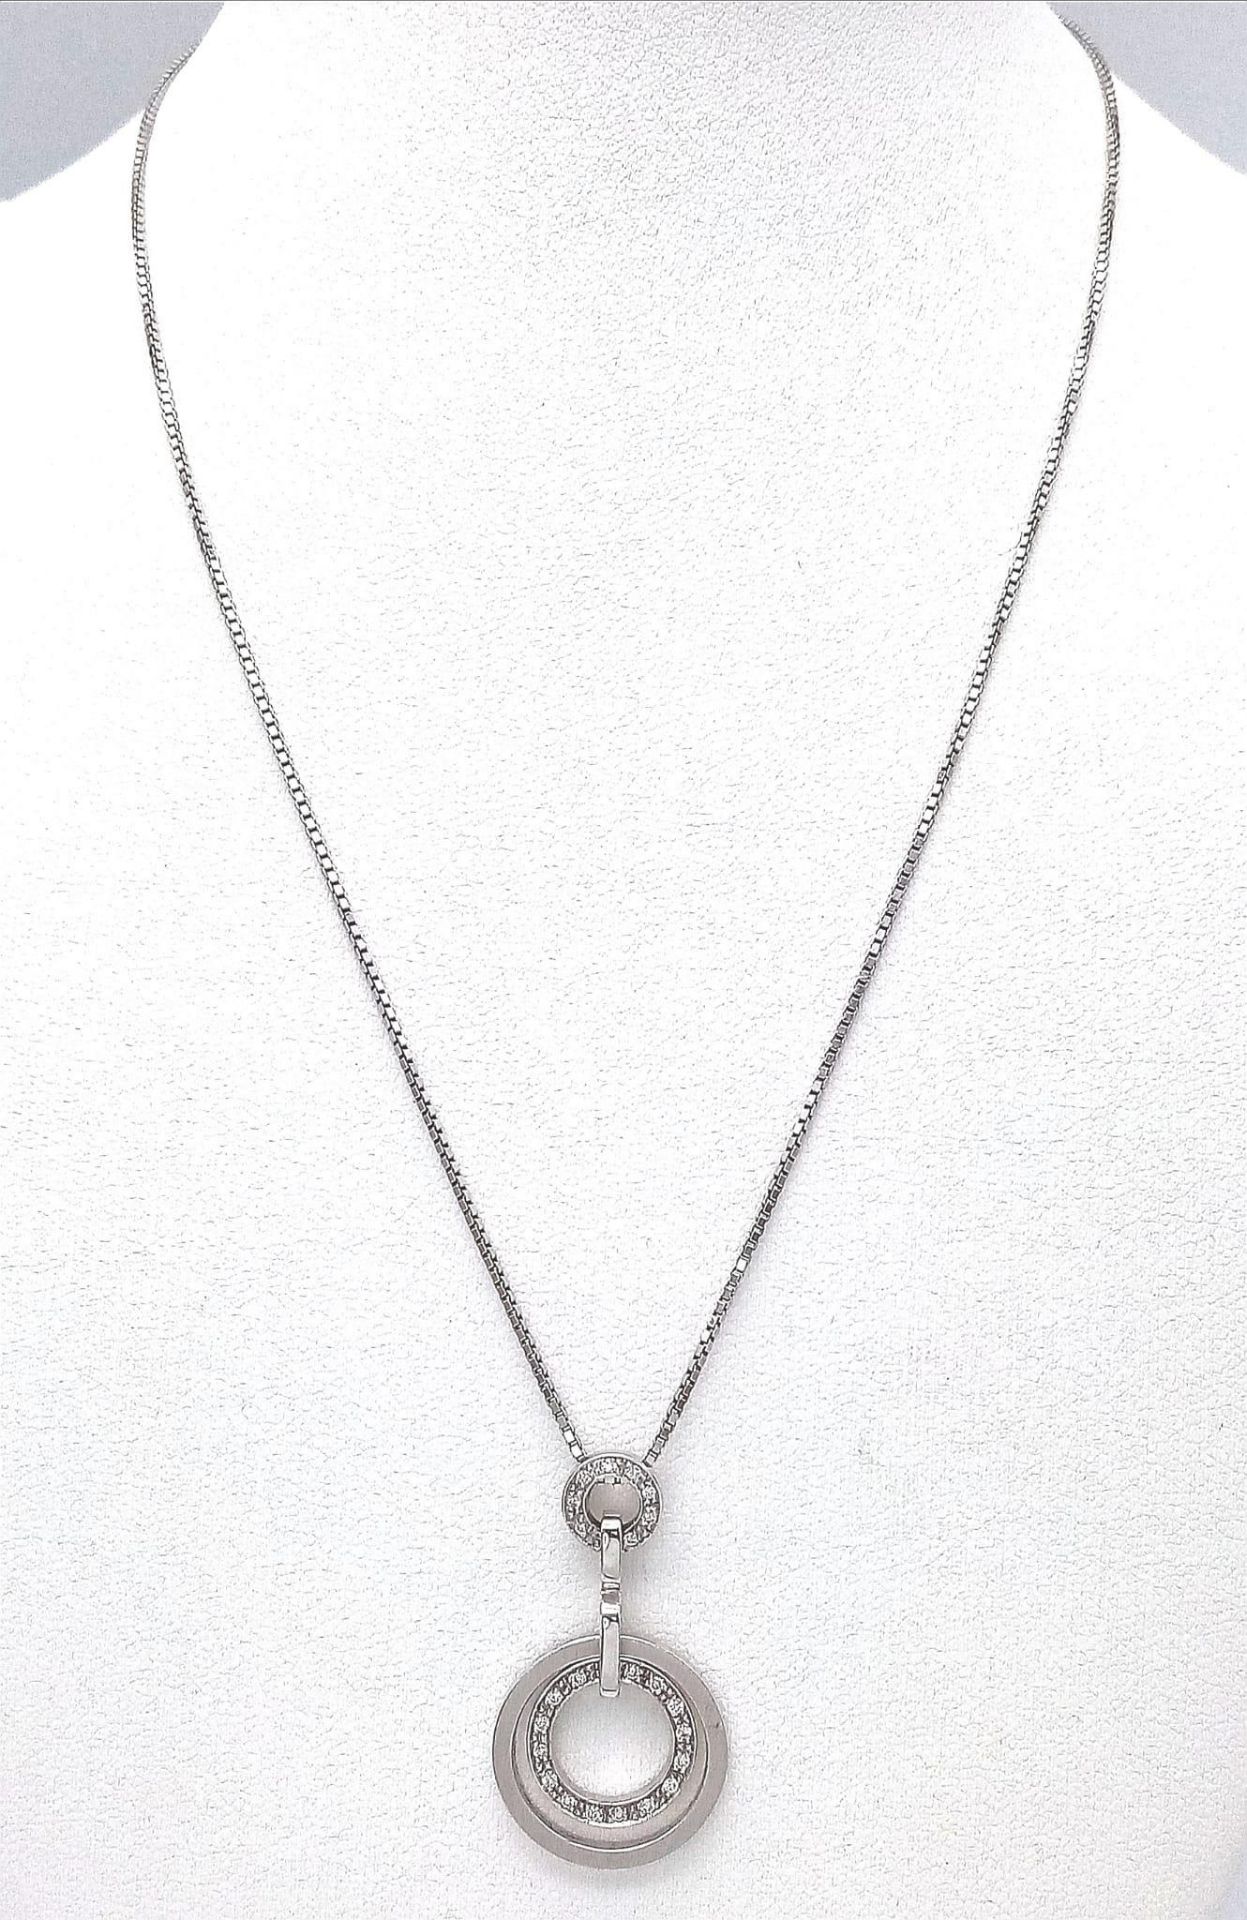 An 18K White Gold Diamond Set Circular Articulated Pendant on a Box Chain. 7.9g total weight. 16" - Image 4 of 6